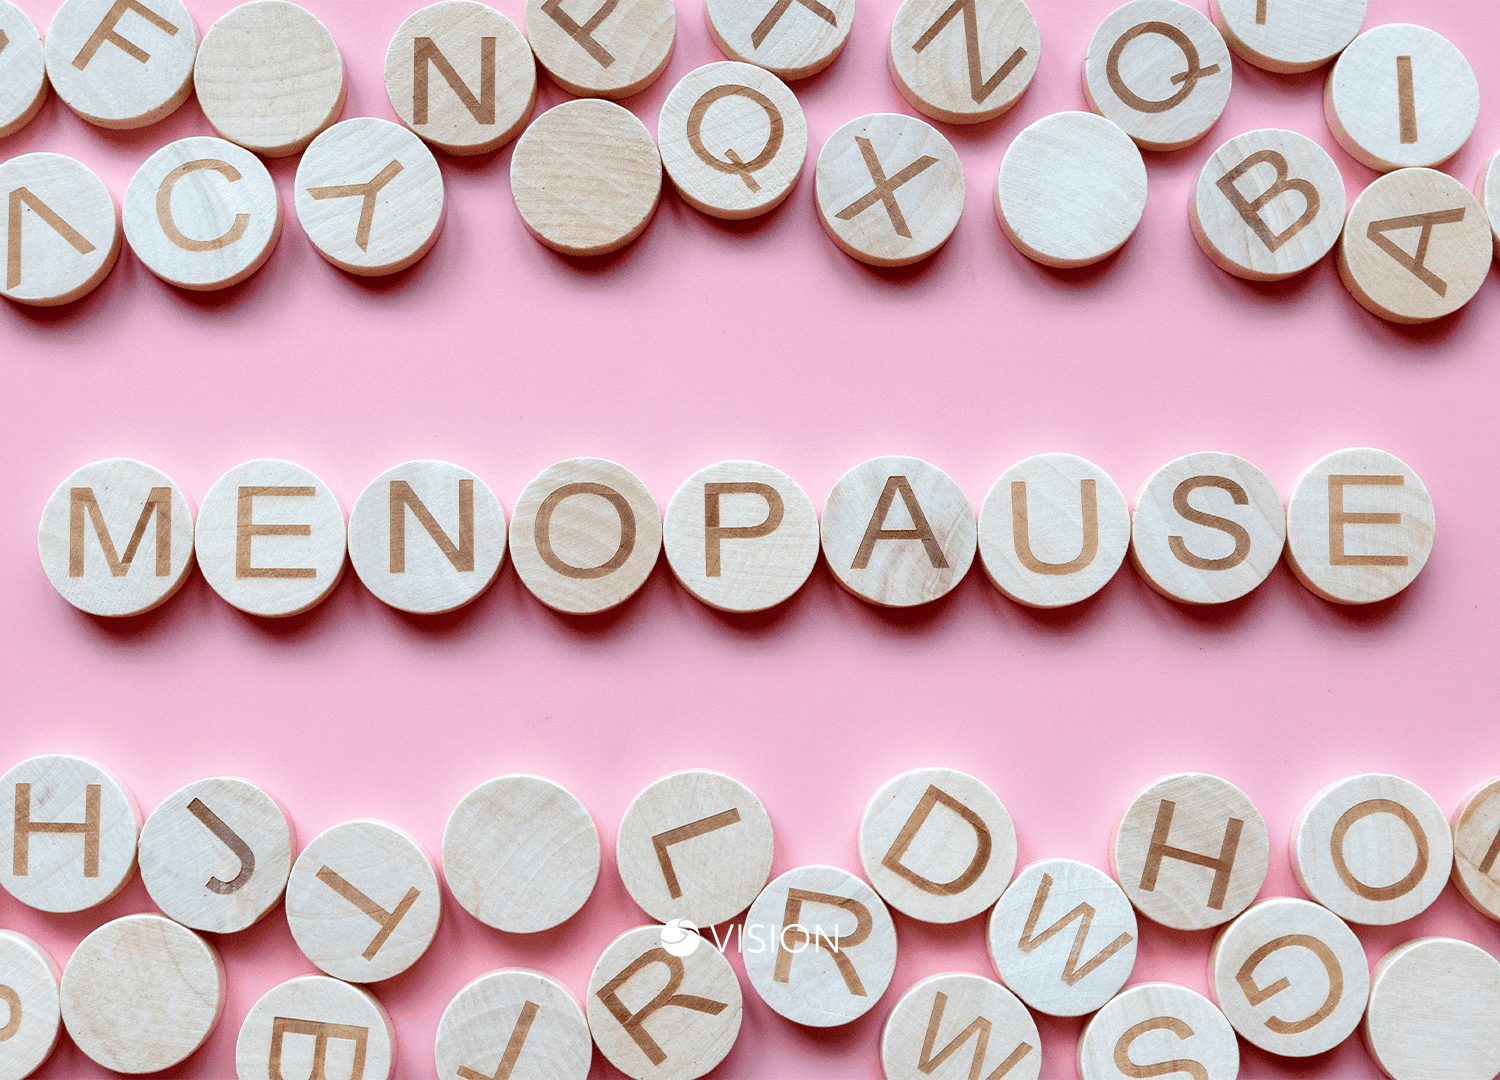 Is The Menopause Causing You Sleepless Nights?